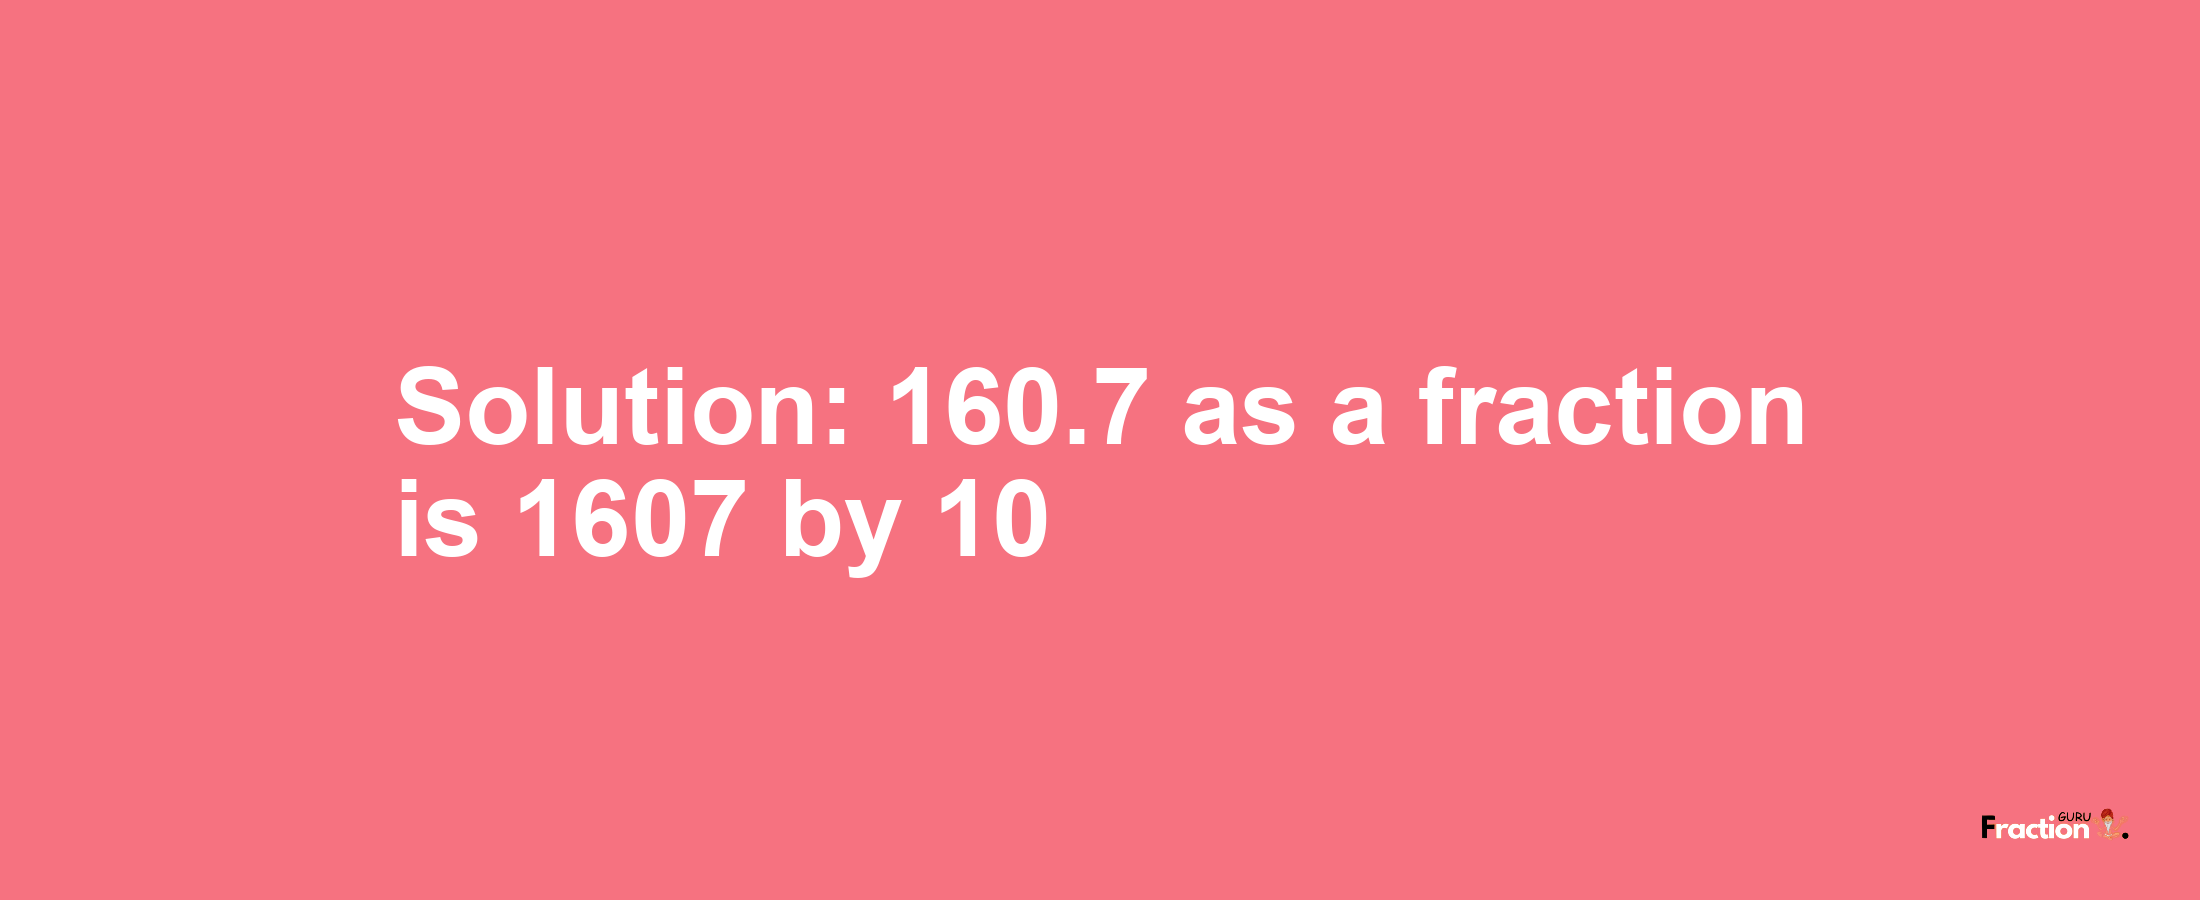 Solution:160.7 as a fraction is 1607/10